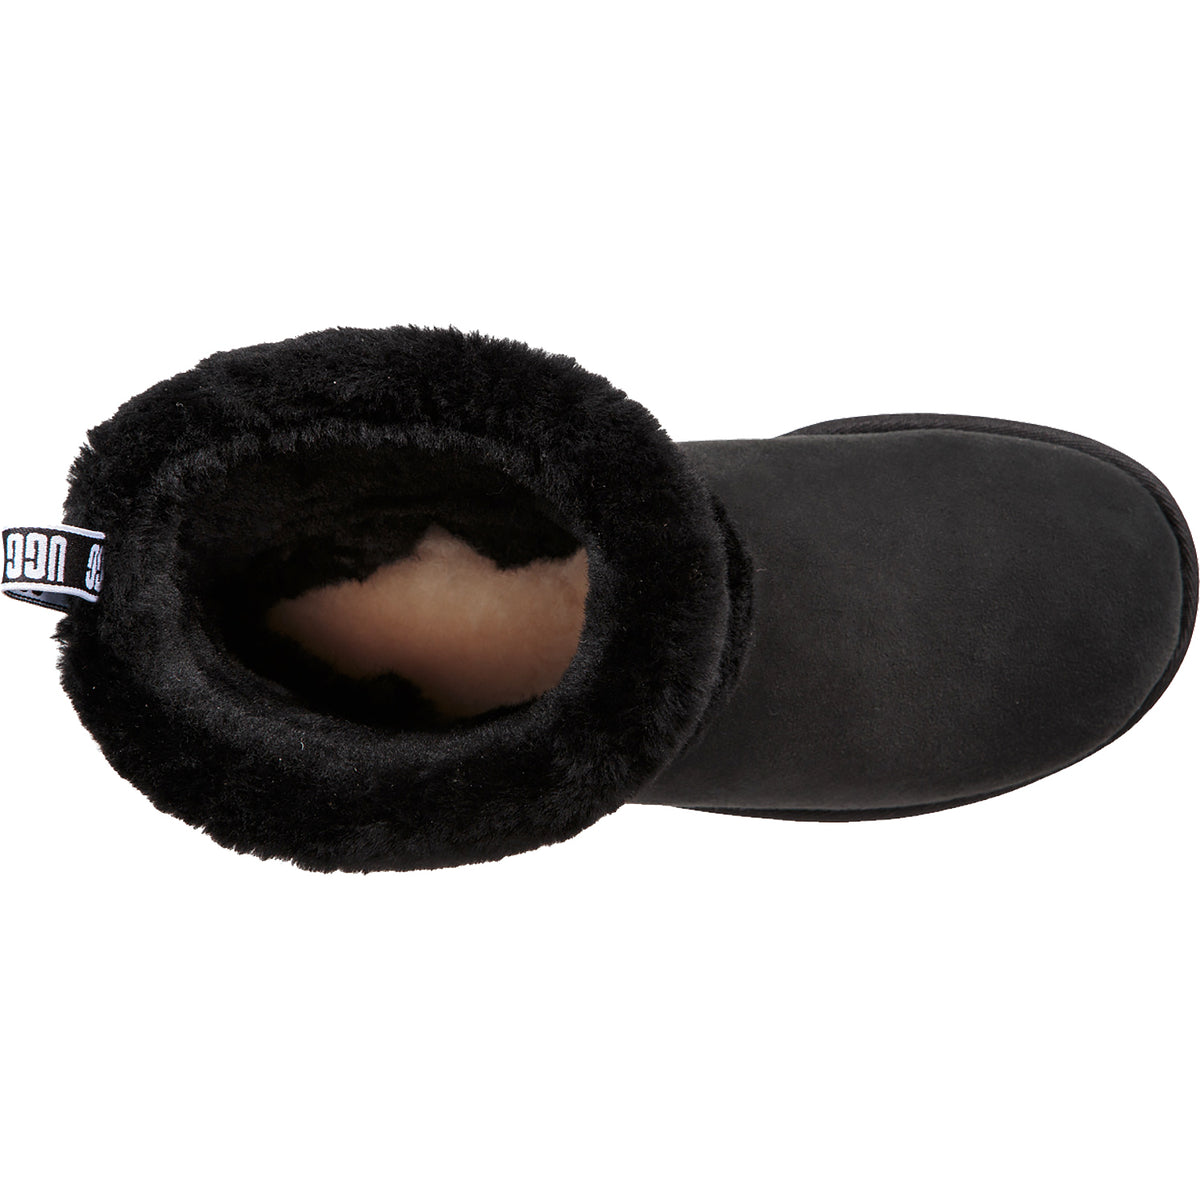 UGG® Fluff Mini Quilted Black | Women's Boots | Footwear etc.